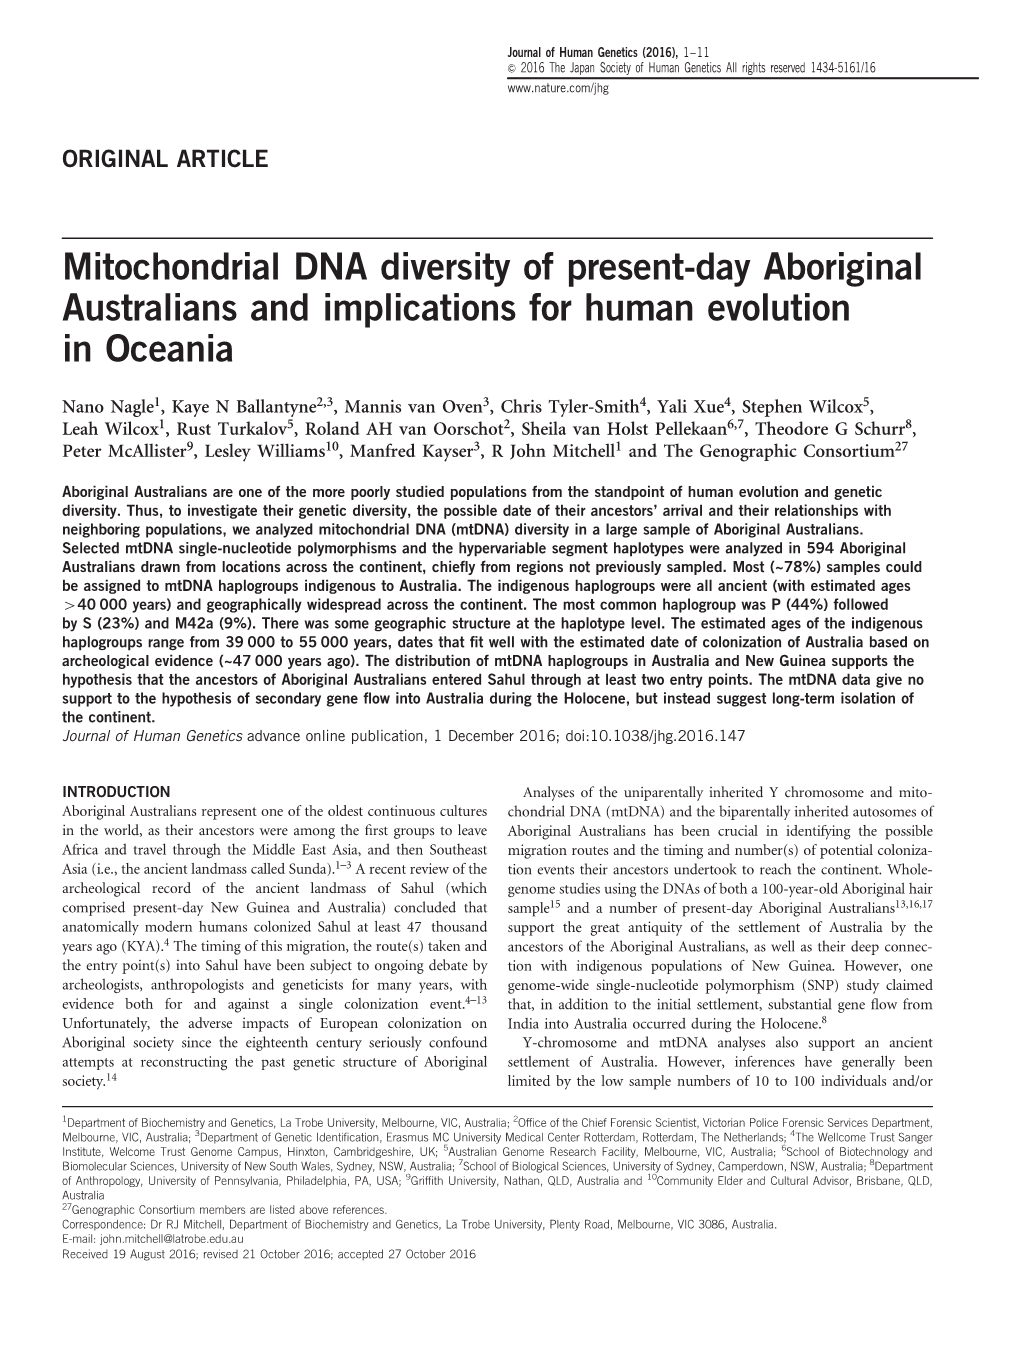 Mitochondrial DNA Diversity of Present-Day Aboriginal Australians and Implications for Human Evolution in Oceania